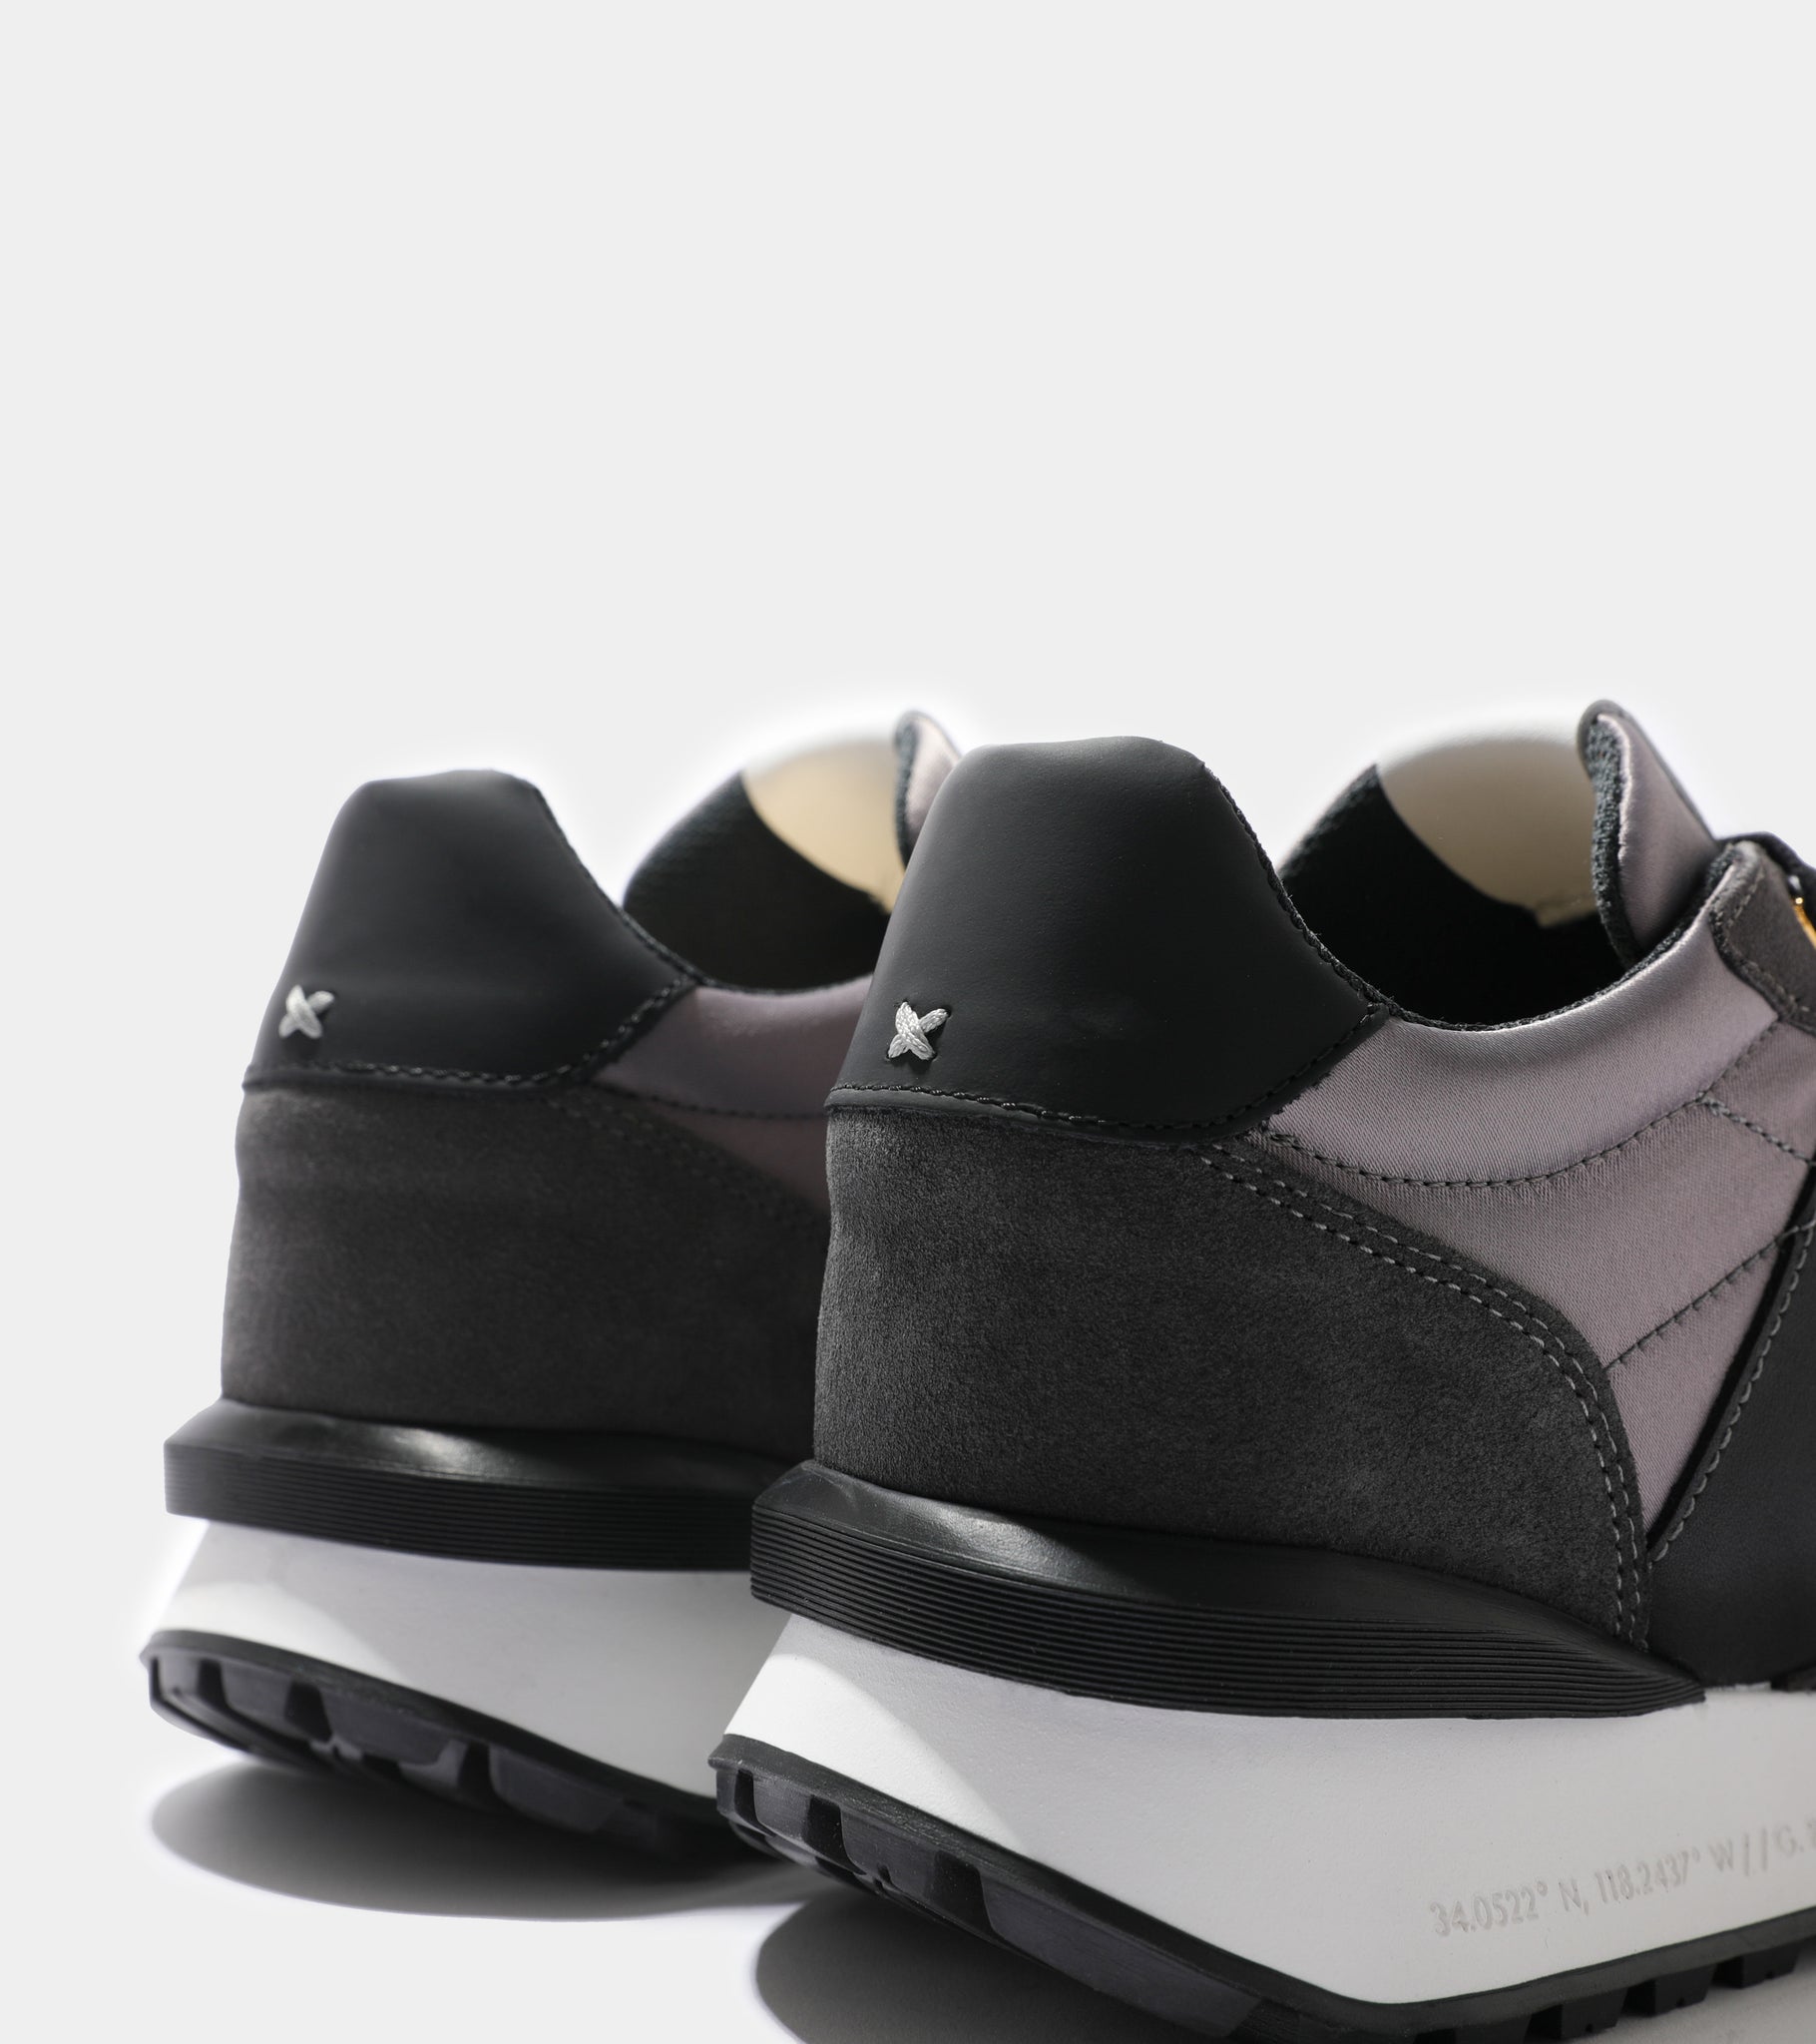 Detailed ecom imagery of the heel of the Marina Del Rey Grey Nylon Black Suede Android Homme Trainers.